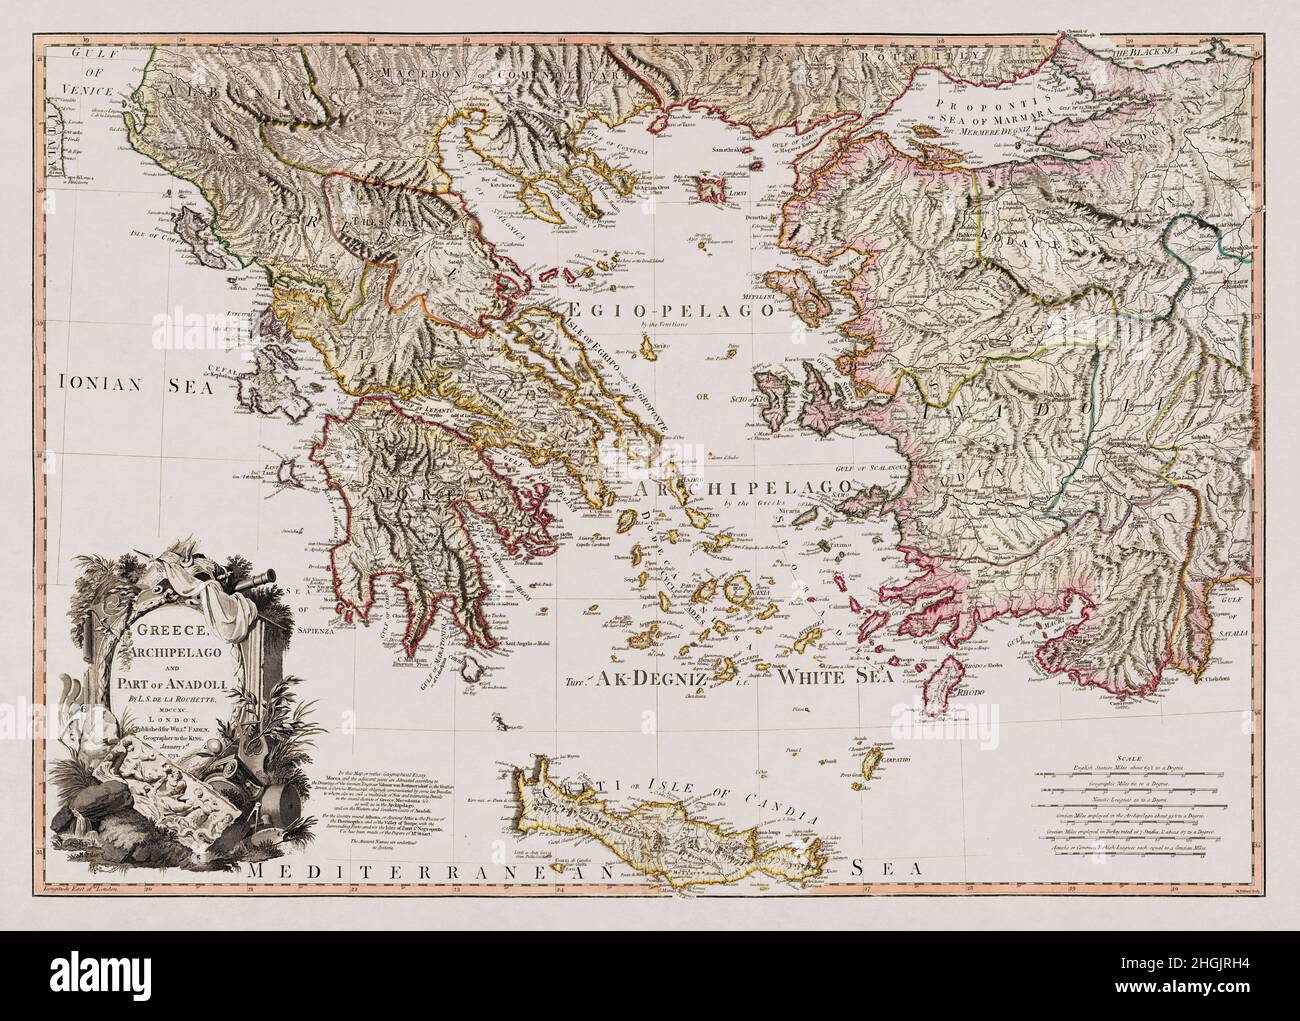 Map of Greece, it's archipelago and part of Anadoli drawn by Louis Stanislas d'Arcy Delarochette in 1791. Stock Photo